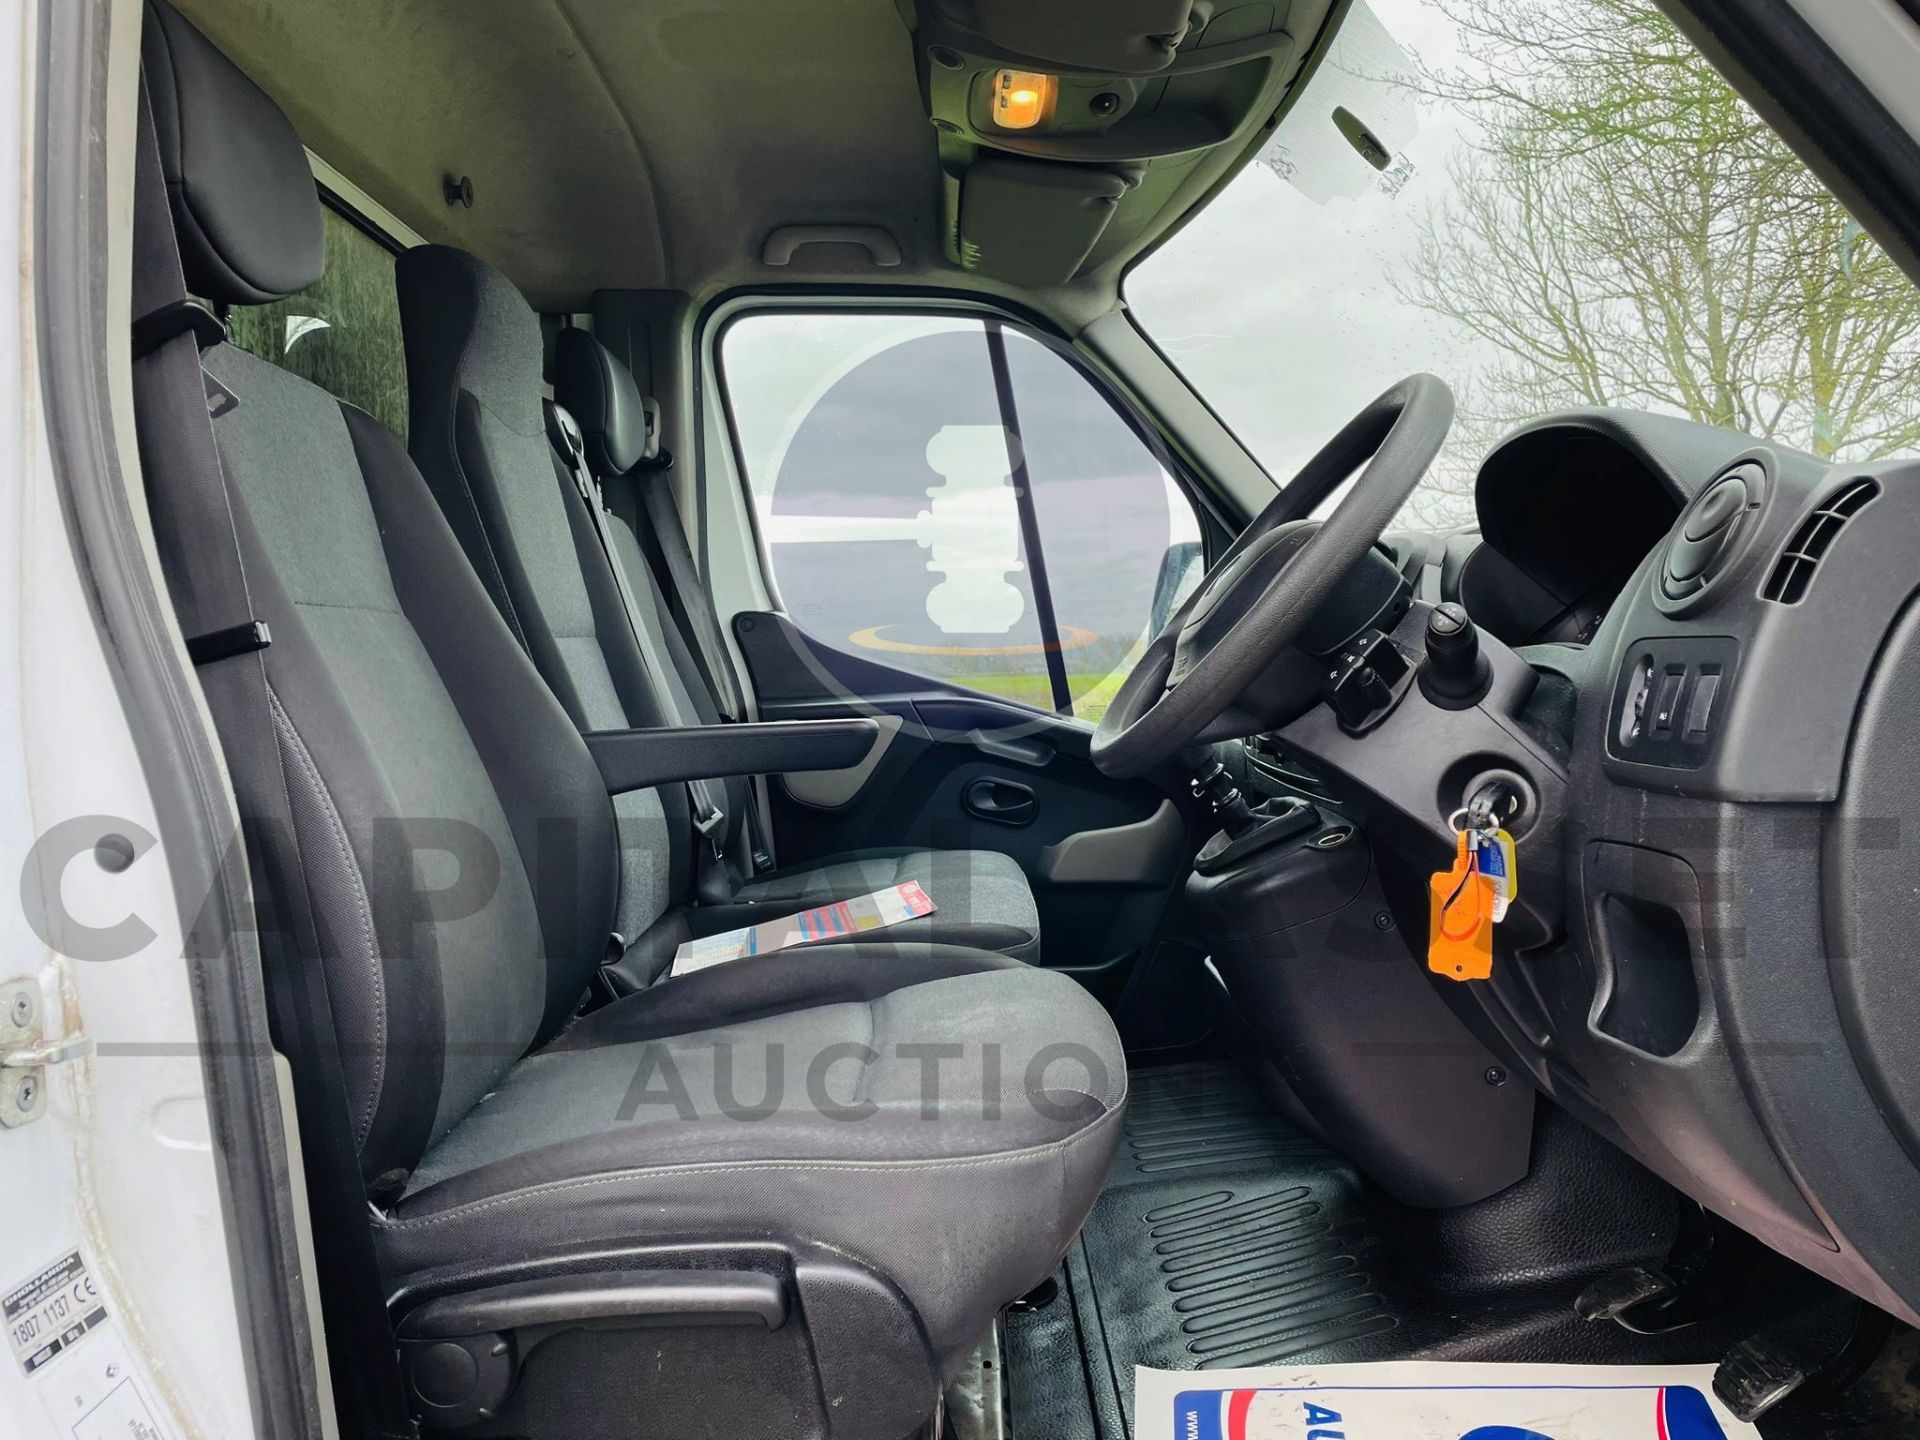 RENAULT MASTER 2.3 DCI 130 BUSINESS EDITION LWB (LUTON / BOX VAN) - 2019 MODEL - EURO 6 - TAIL LIFT! - Image 11 of 19